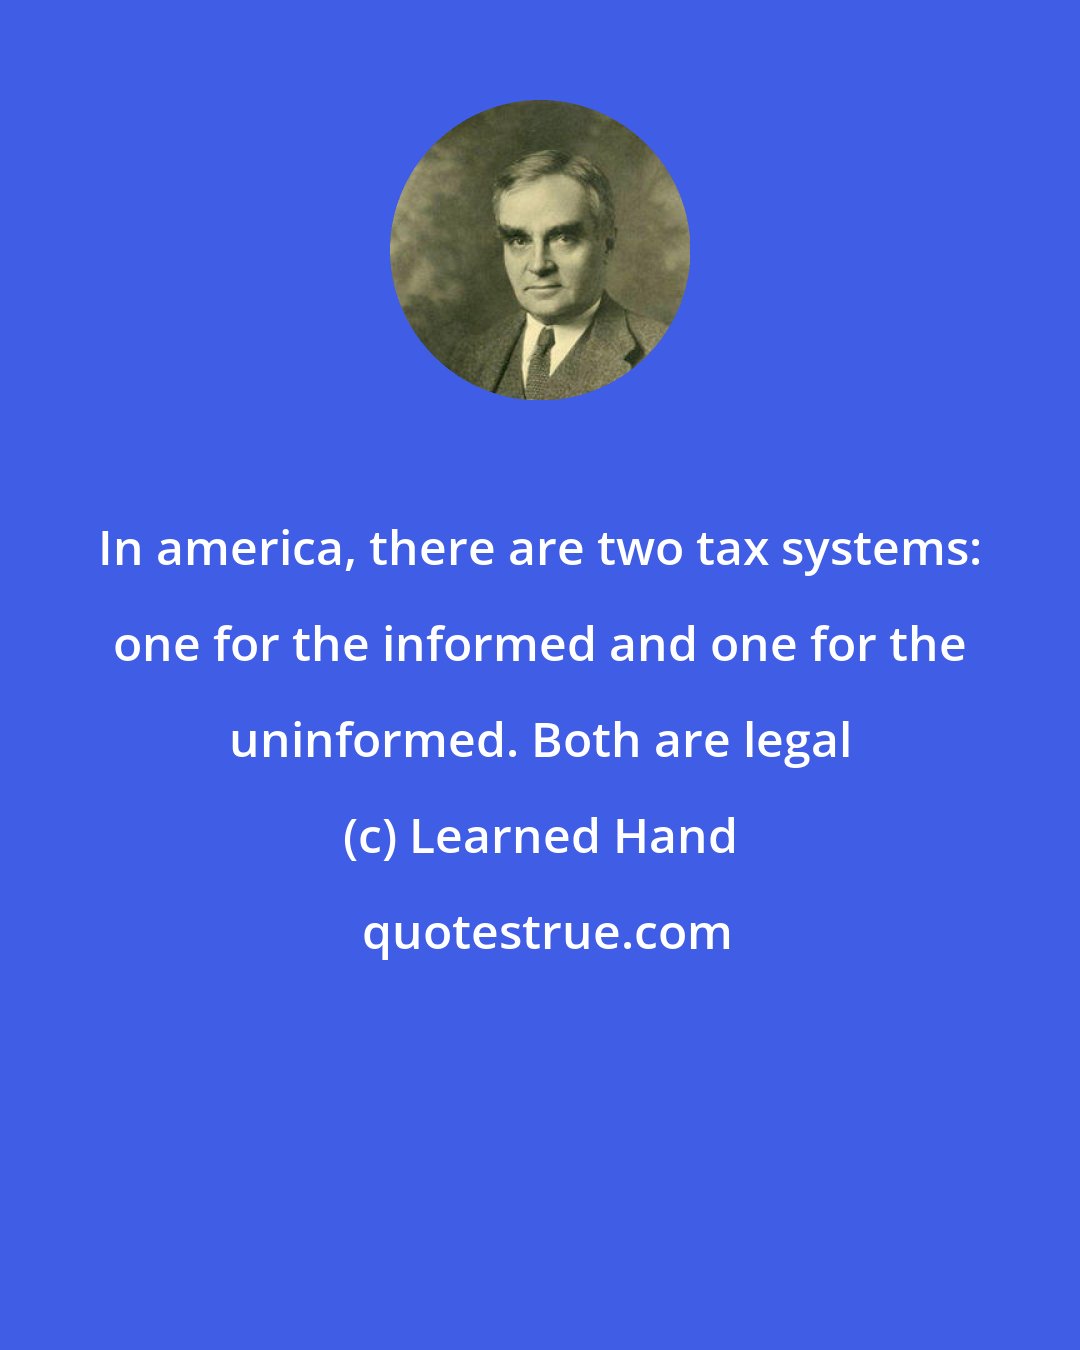 Learned Hand: In america, there are two tax systems: one for the informed and one for the uninformed. Both are legal